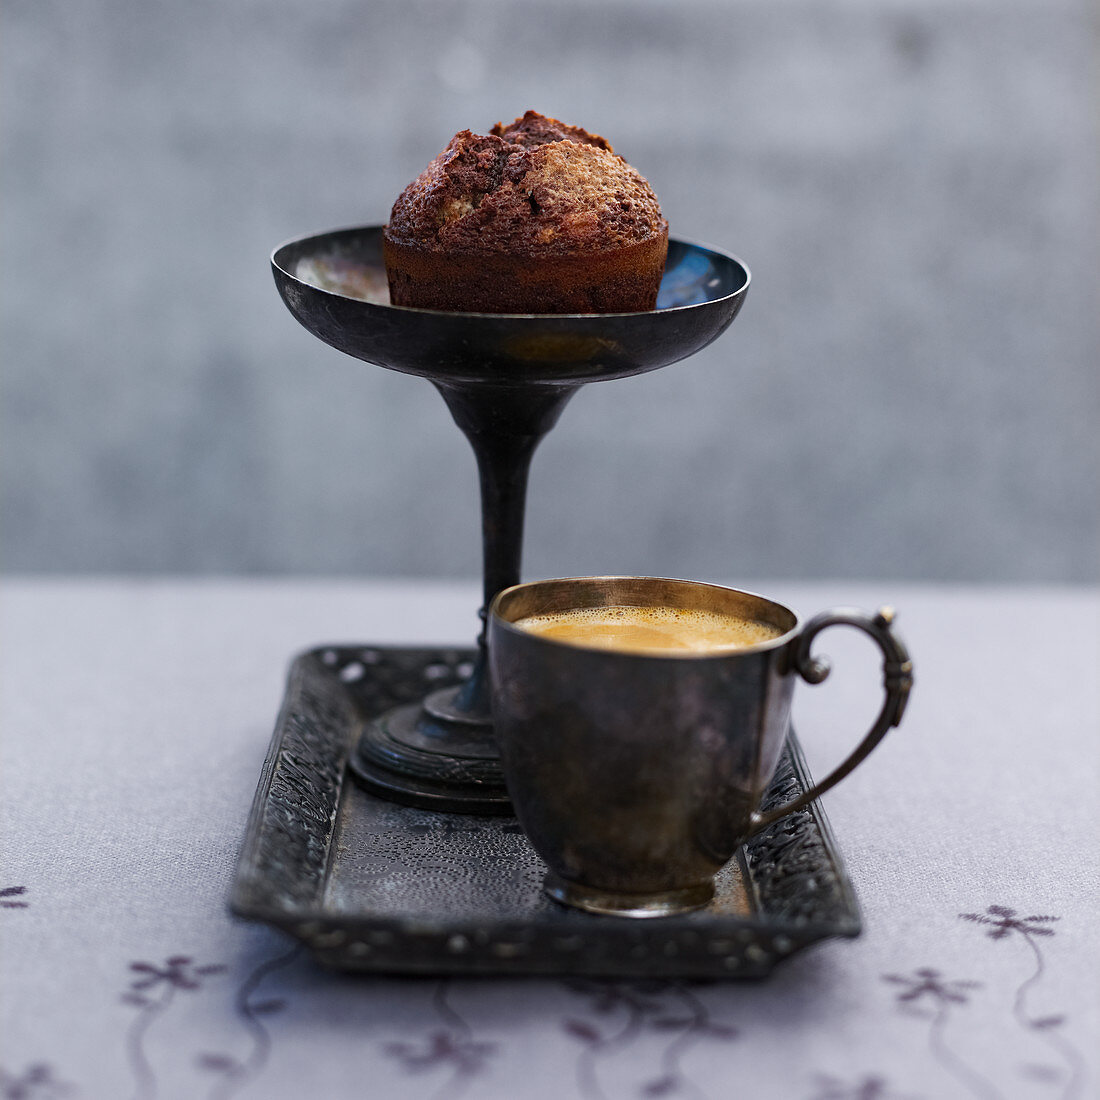 Moelleux-style mini marble cake with cappuccino